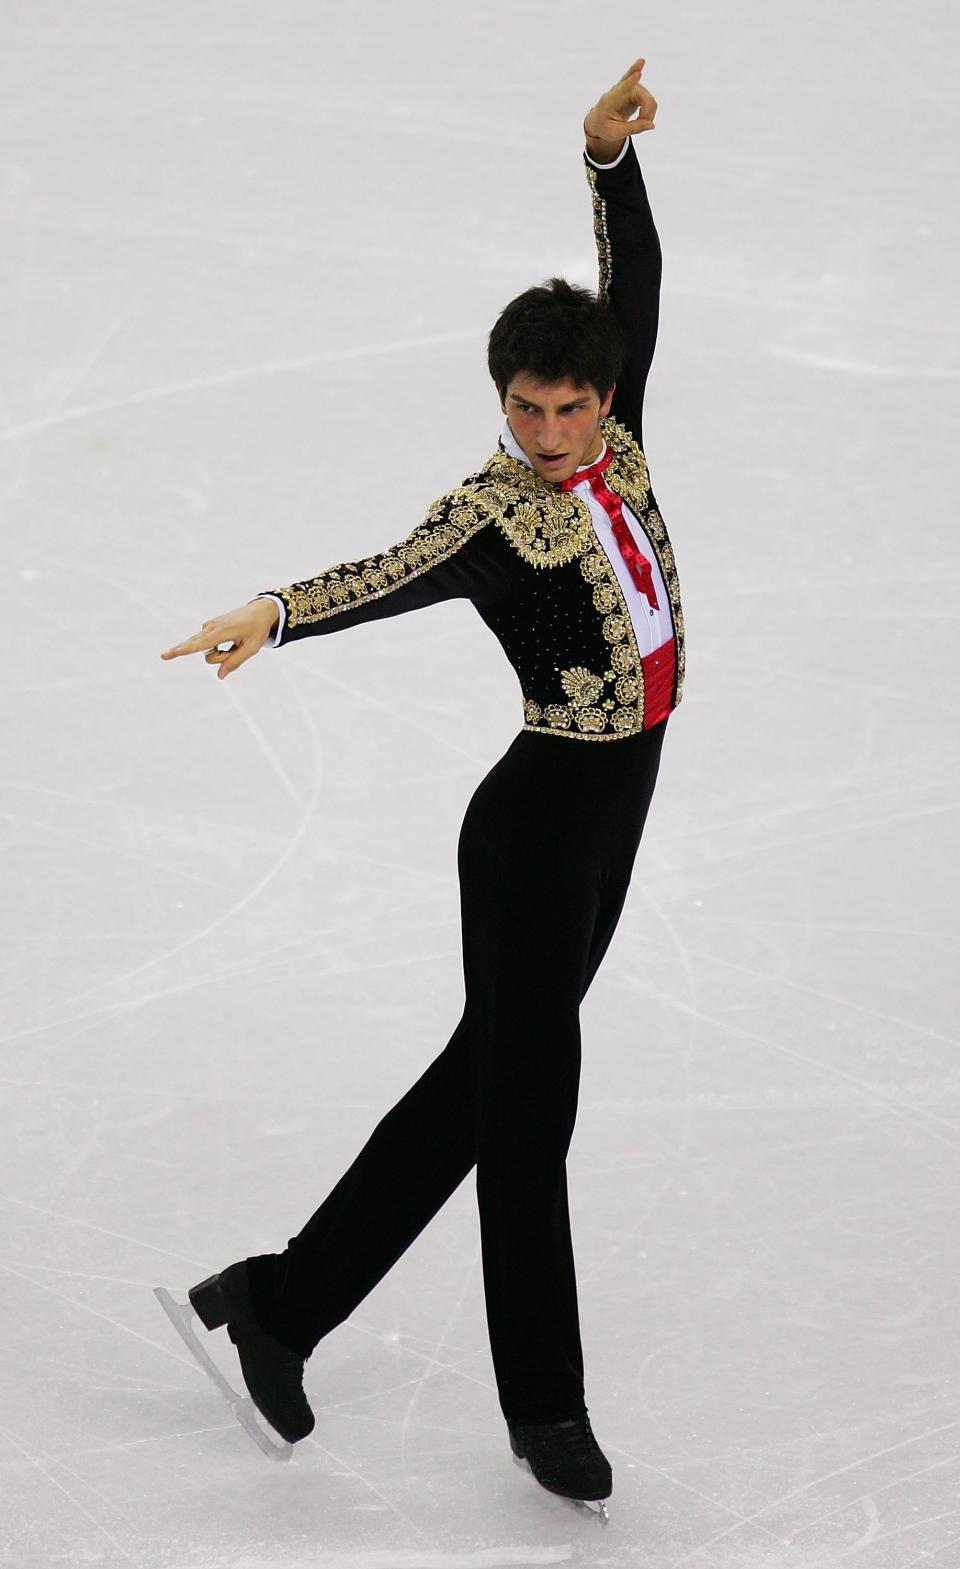 The American competes in the&nbsp;men's&nbsp;short&nbsp;program at the Turin Games in 2016 in Italy.